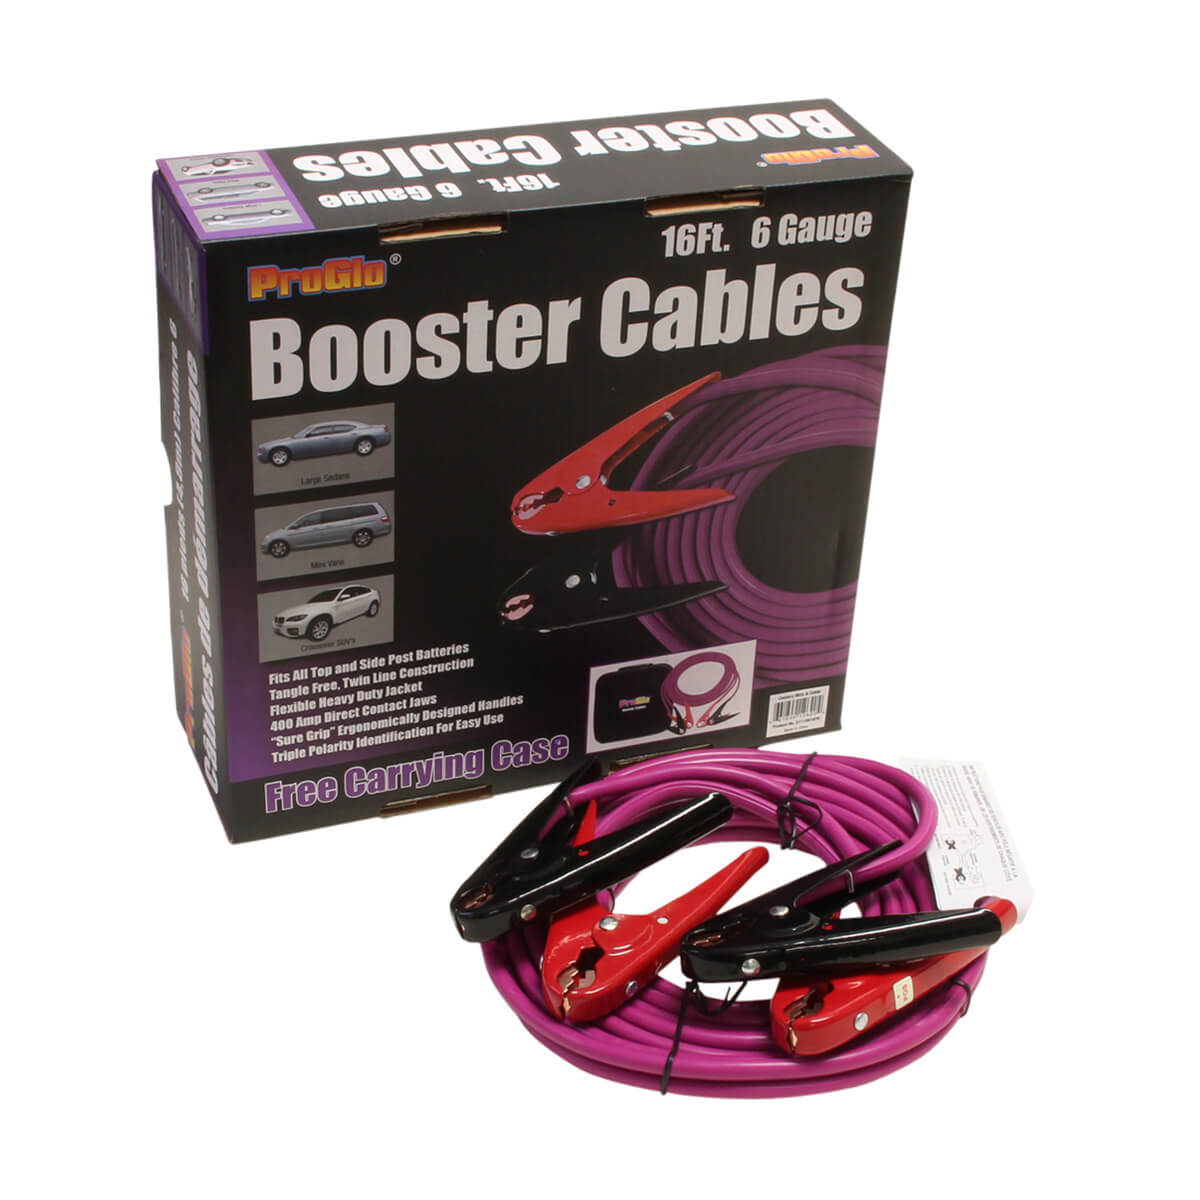 Pro Glo® Booster Cables - 6 Gauge with Case - 16-ft